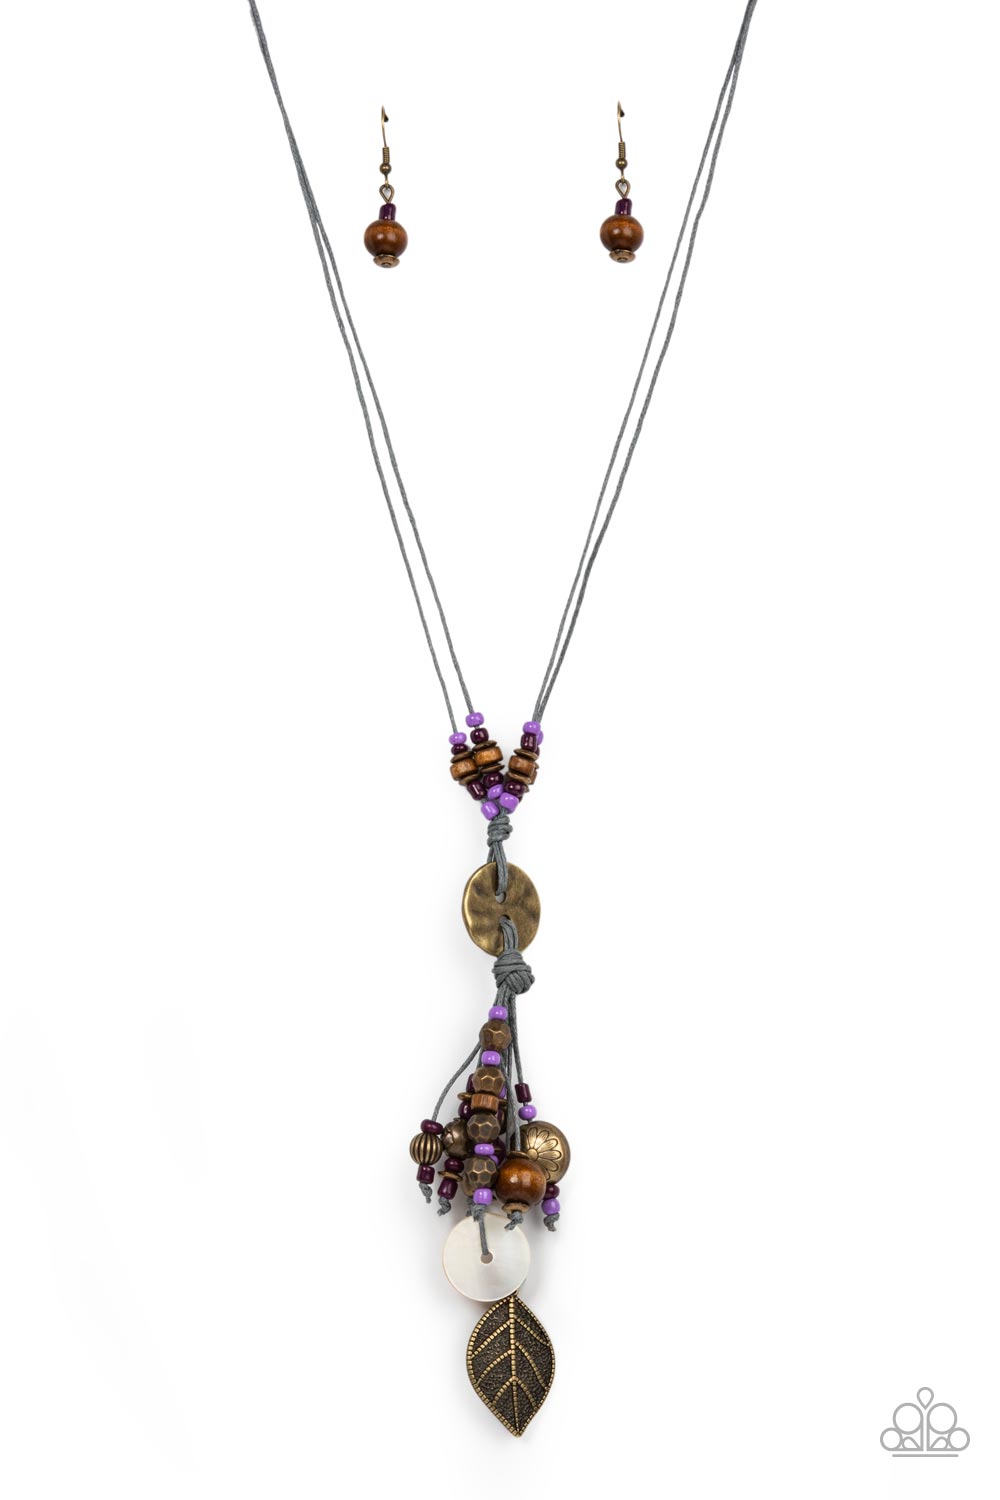 Knotted Keepsake Paparazzi Accessories Necklace with Earrings  - Purple